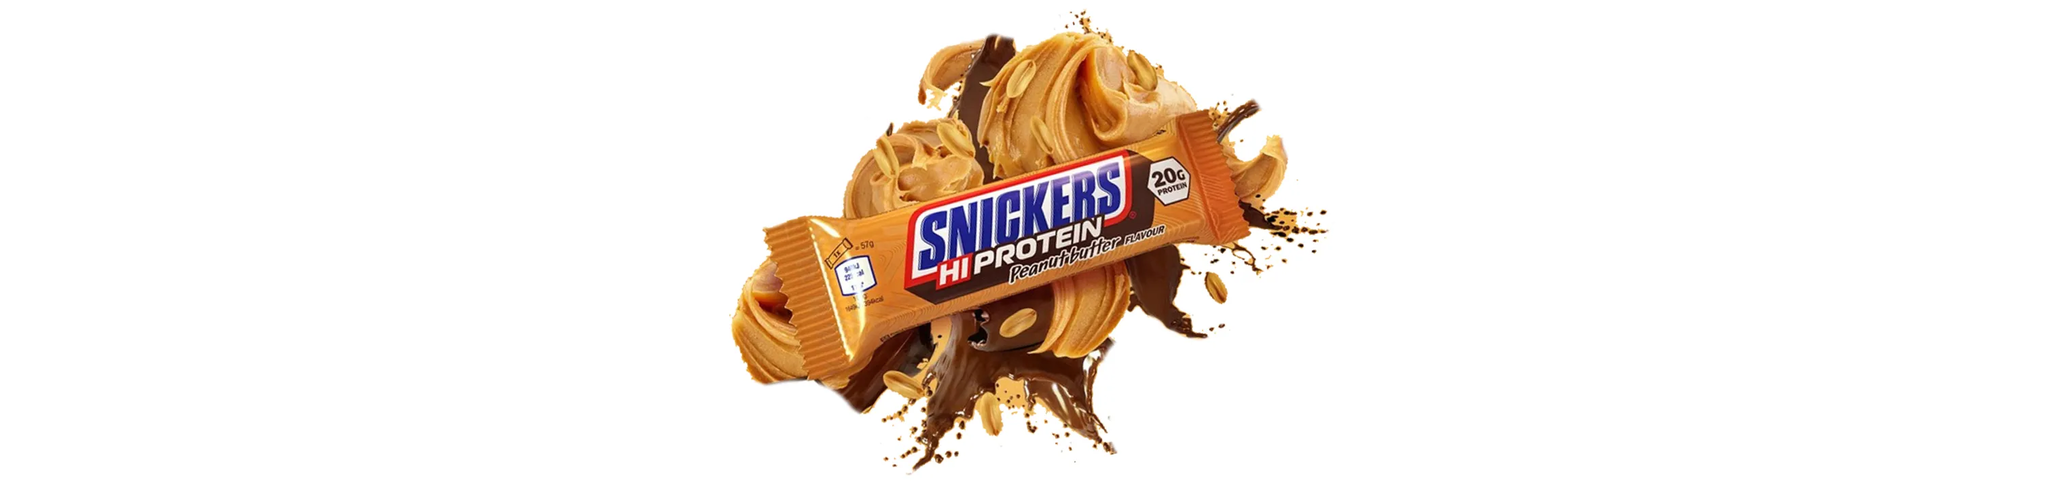 Real Nutrition Shop - Snickers Hi Protein Peanut Butter